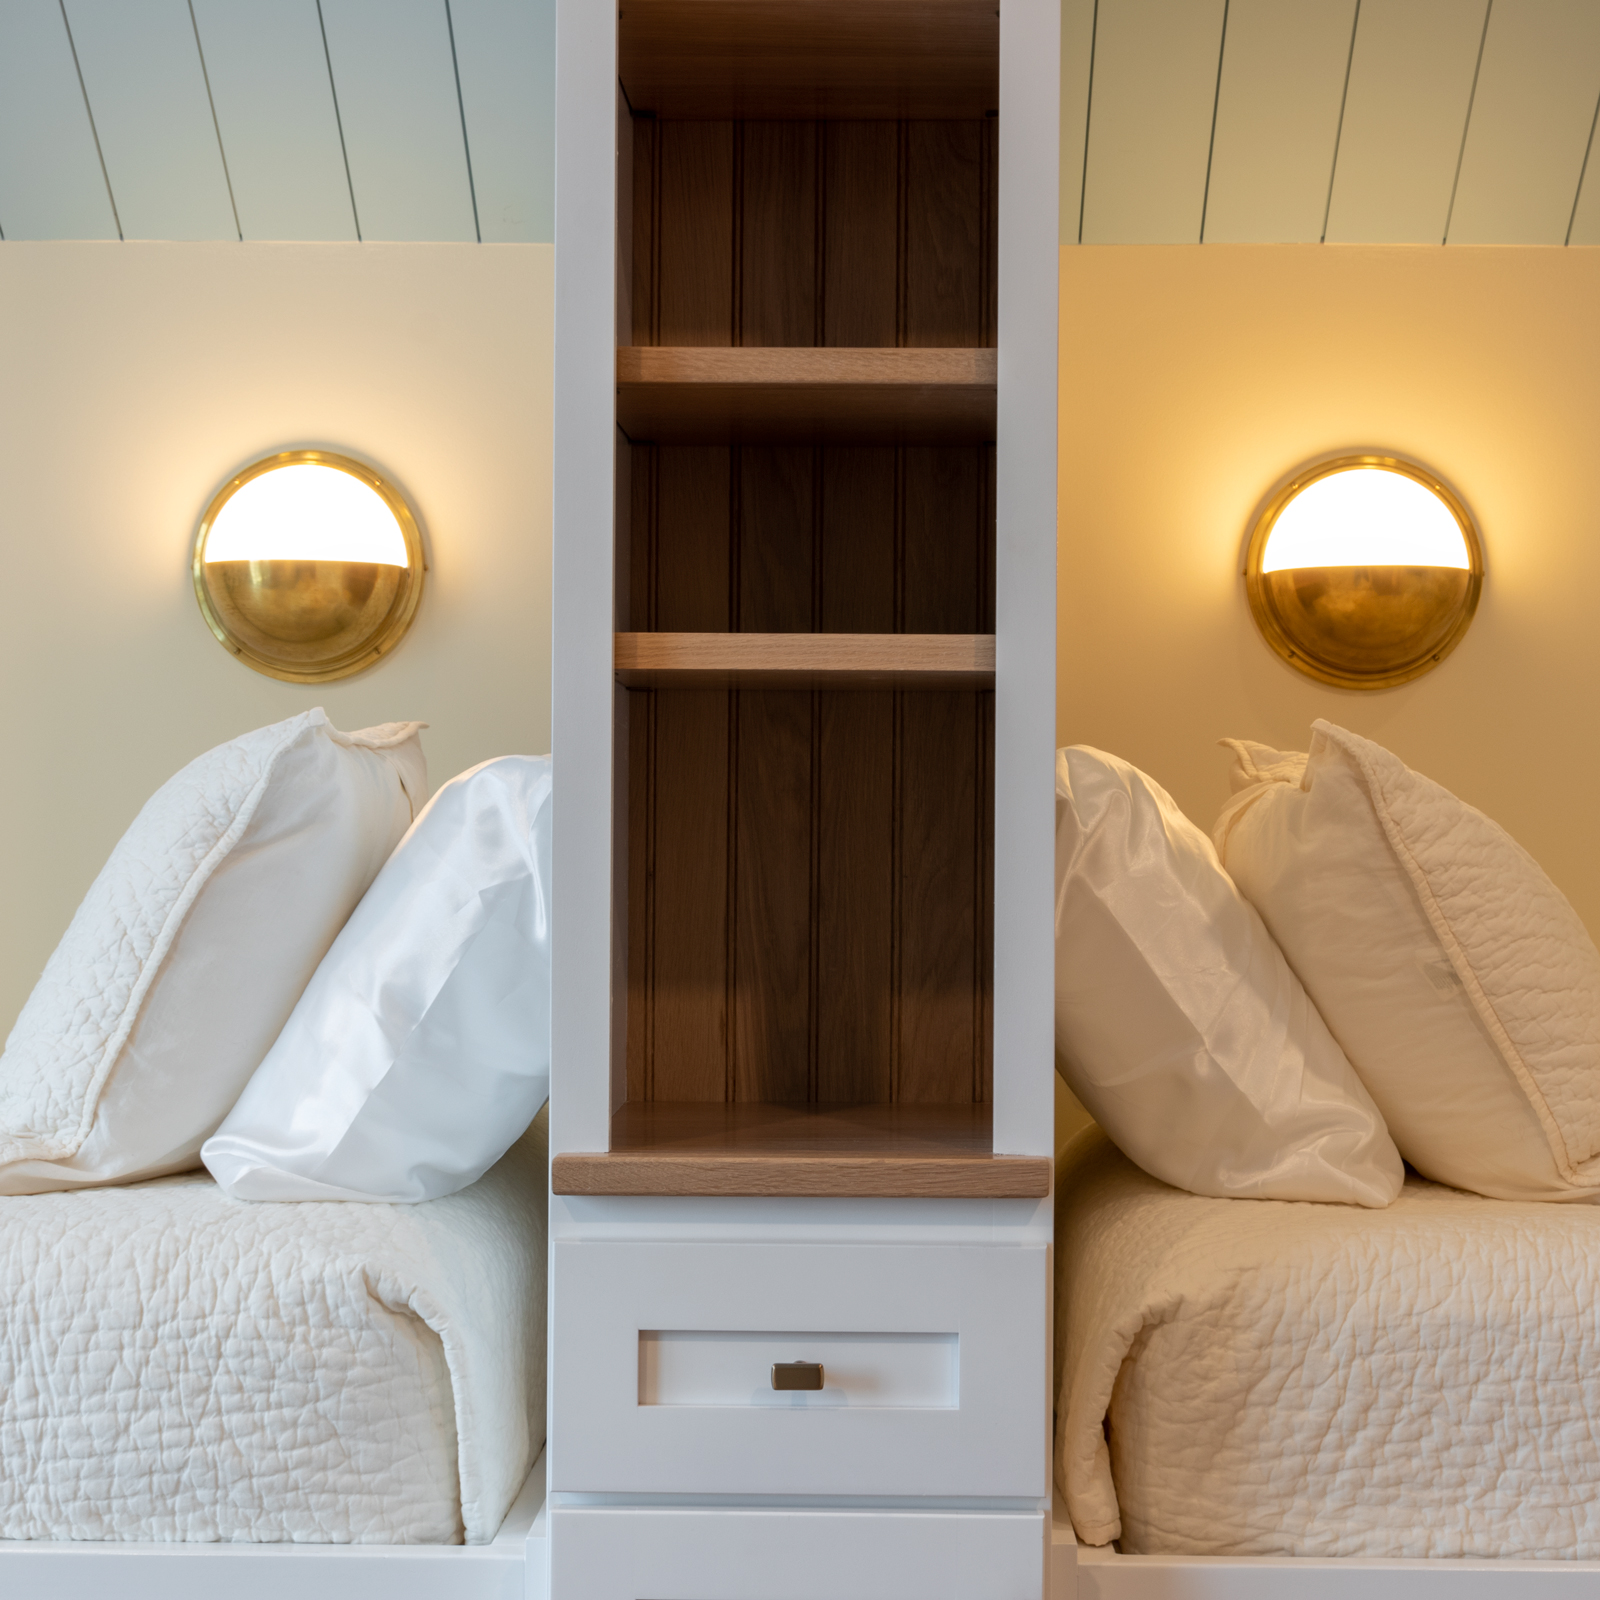 Prioritizing lakeside views, the bunkroom is designed to sleep six with pull-out trundle beds that can be hidden away when guests have gone home.